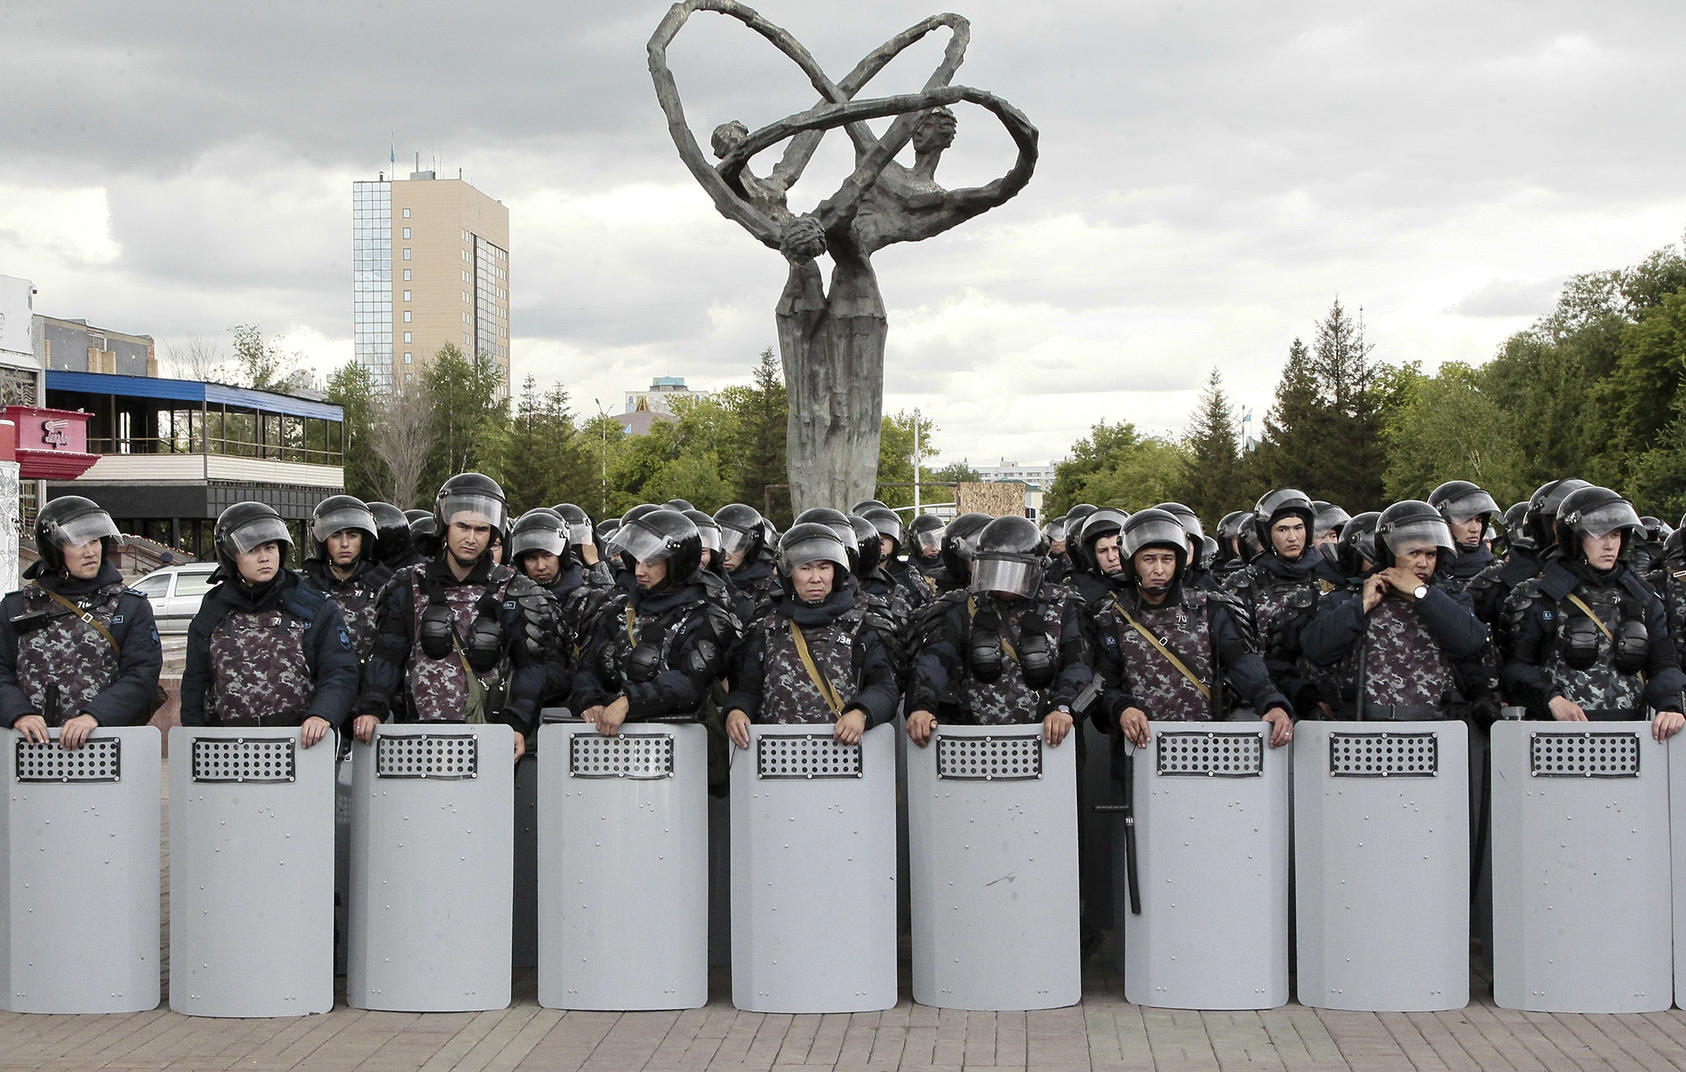 Kazakh police block an area to prevent protests against presidential elections in Nur-Sultan, Kazakhstan, on June 10, 2019. (Alexei Filippov/AP)